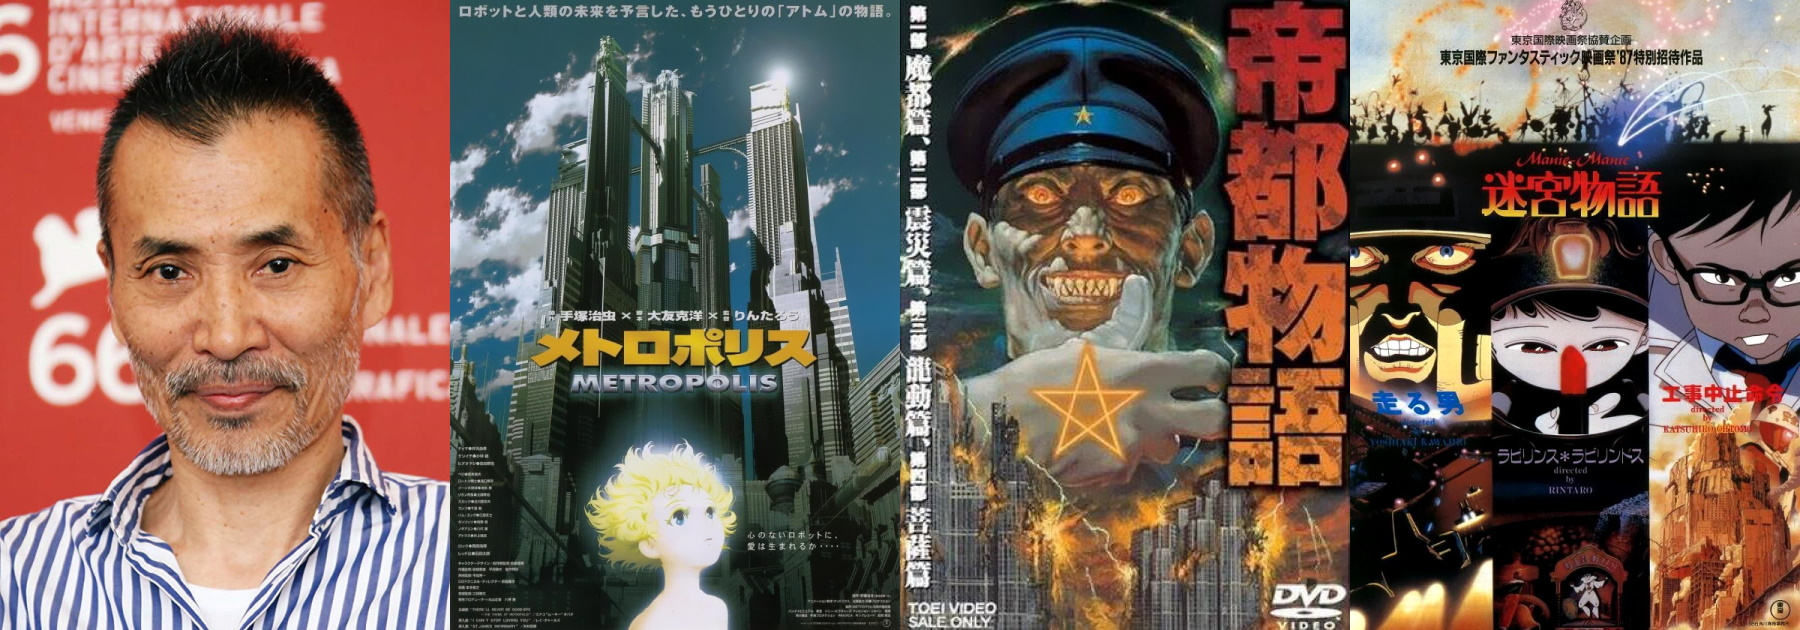 Doomed Megalopolis (帝都物語, 1991) directed by Rintaro and